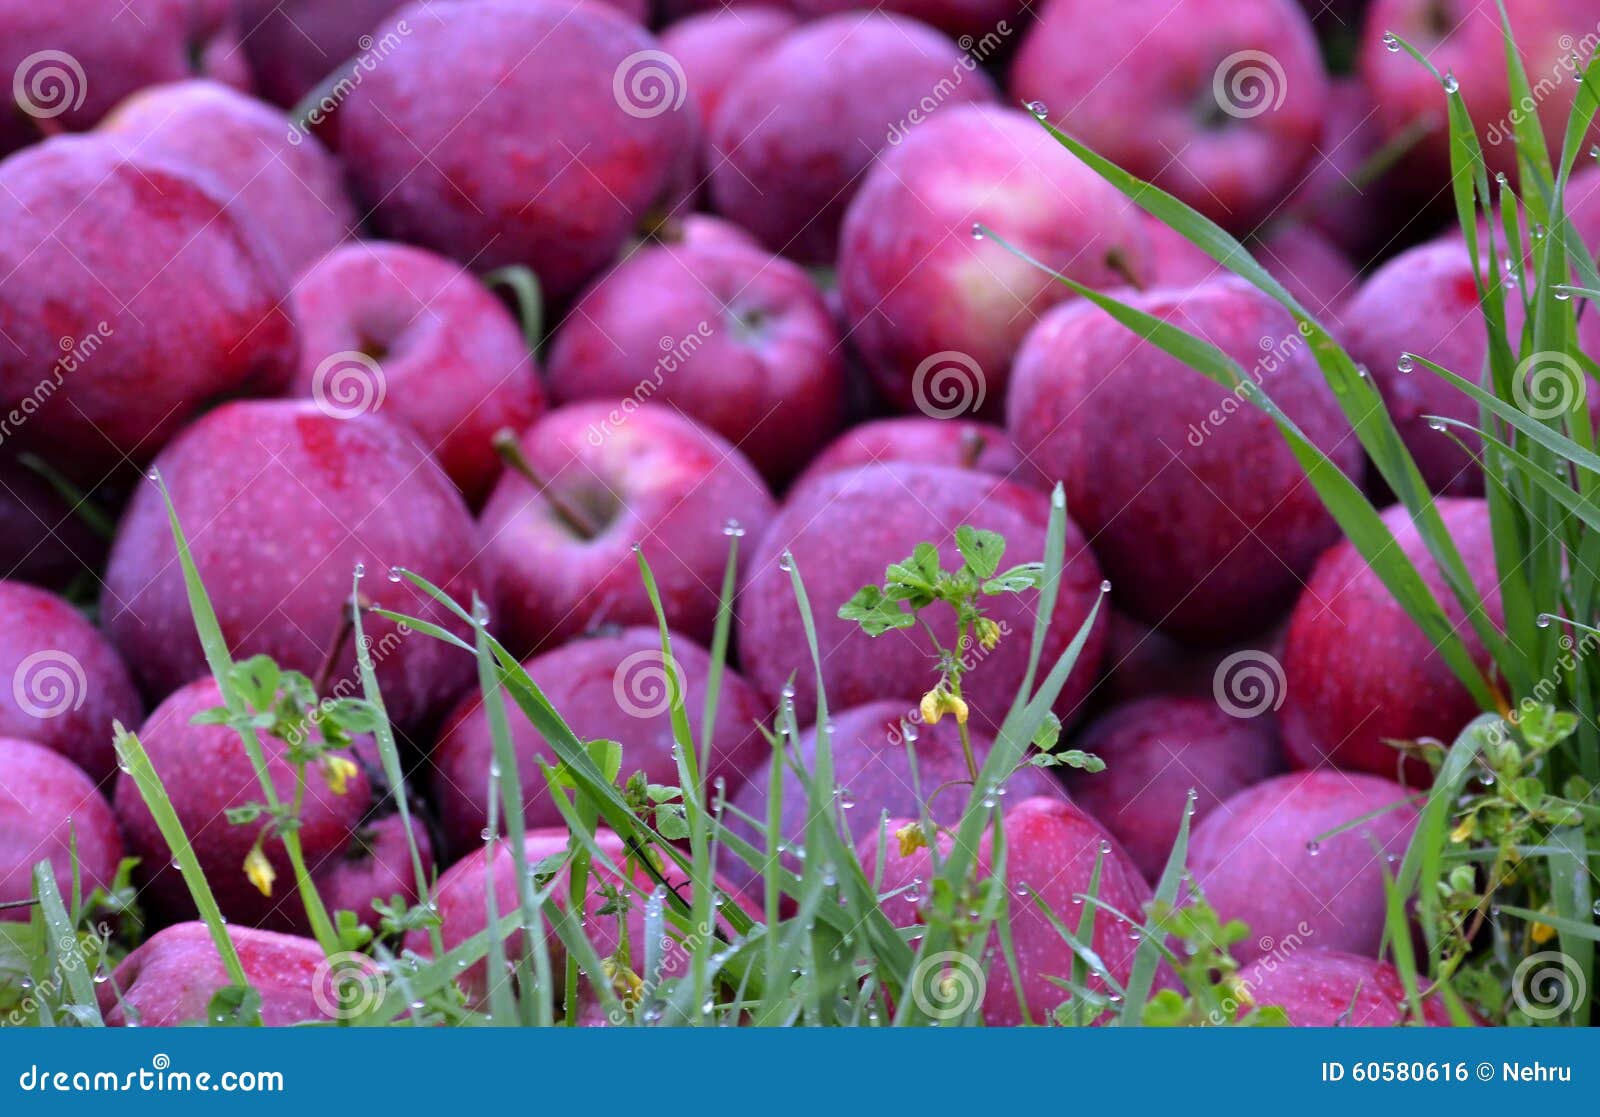 https://thumbs.dreamstime.com/z/apple-fruits-green-grass-picture-october-ready-harvesting-orchard-60580616.jpg